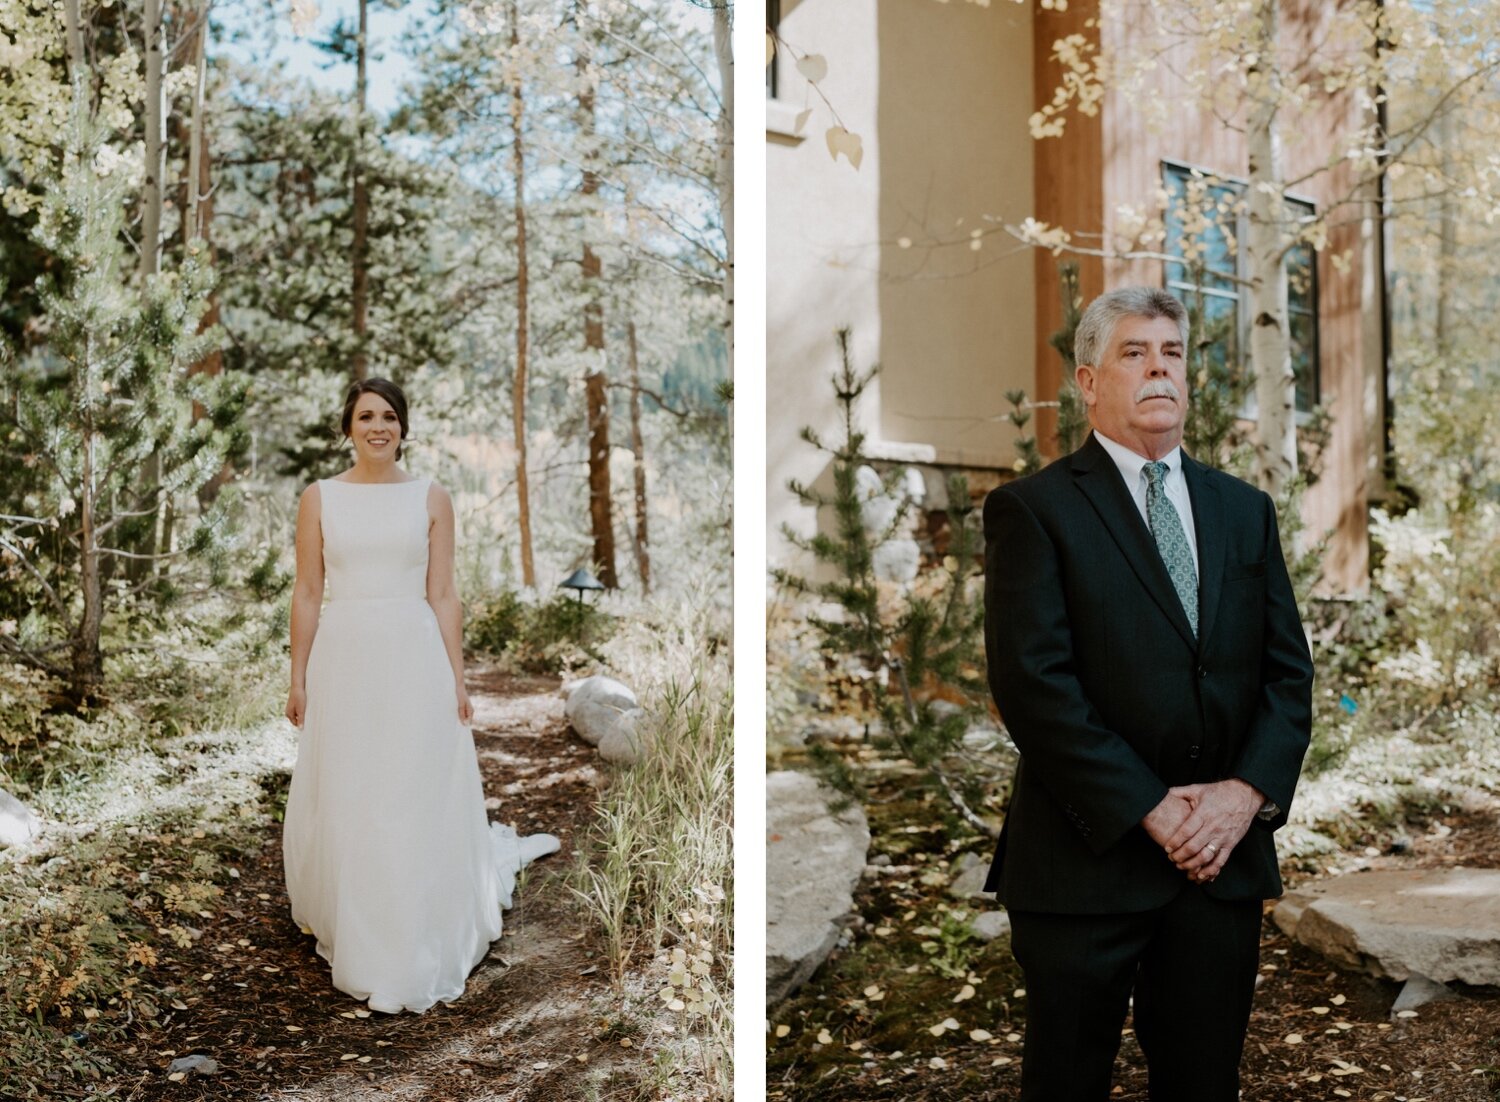  First look with bride and father, Windy Point Campground Wedding Colorado, Dillon Colorado Wedding, Colorado mountain wedding, Dillon Colorado Wedding Photographer, Colorado Wedding Photographer, Colorado mountain wedding venues, Colorado campground